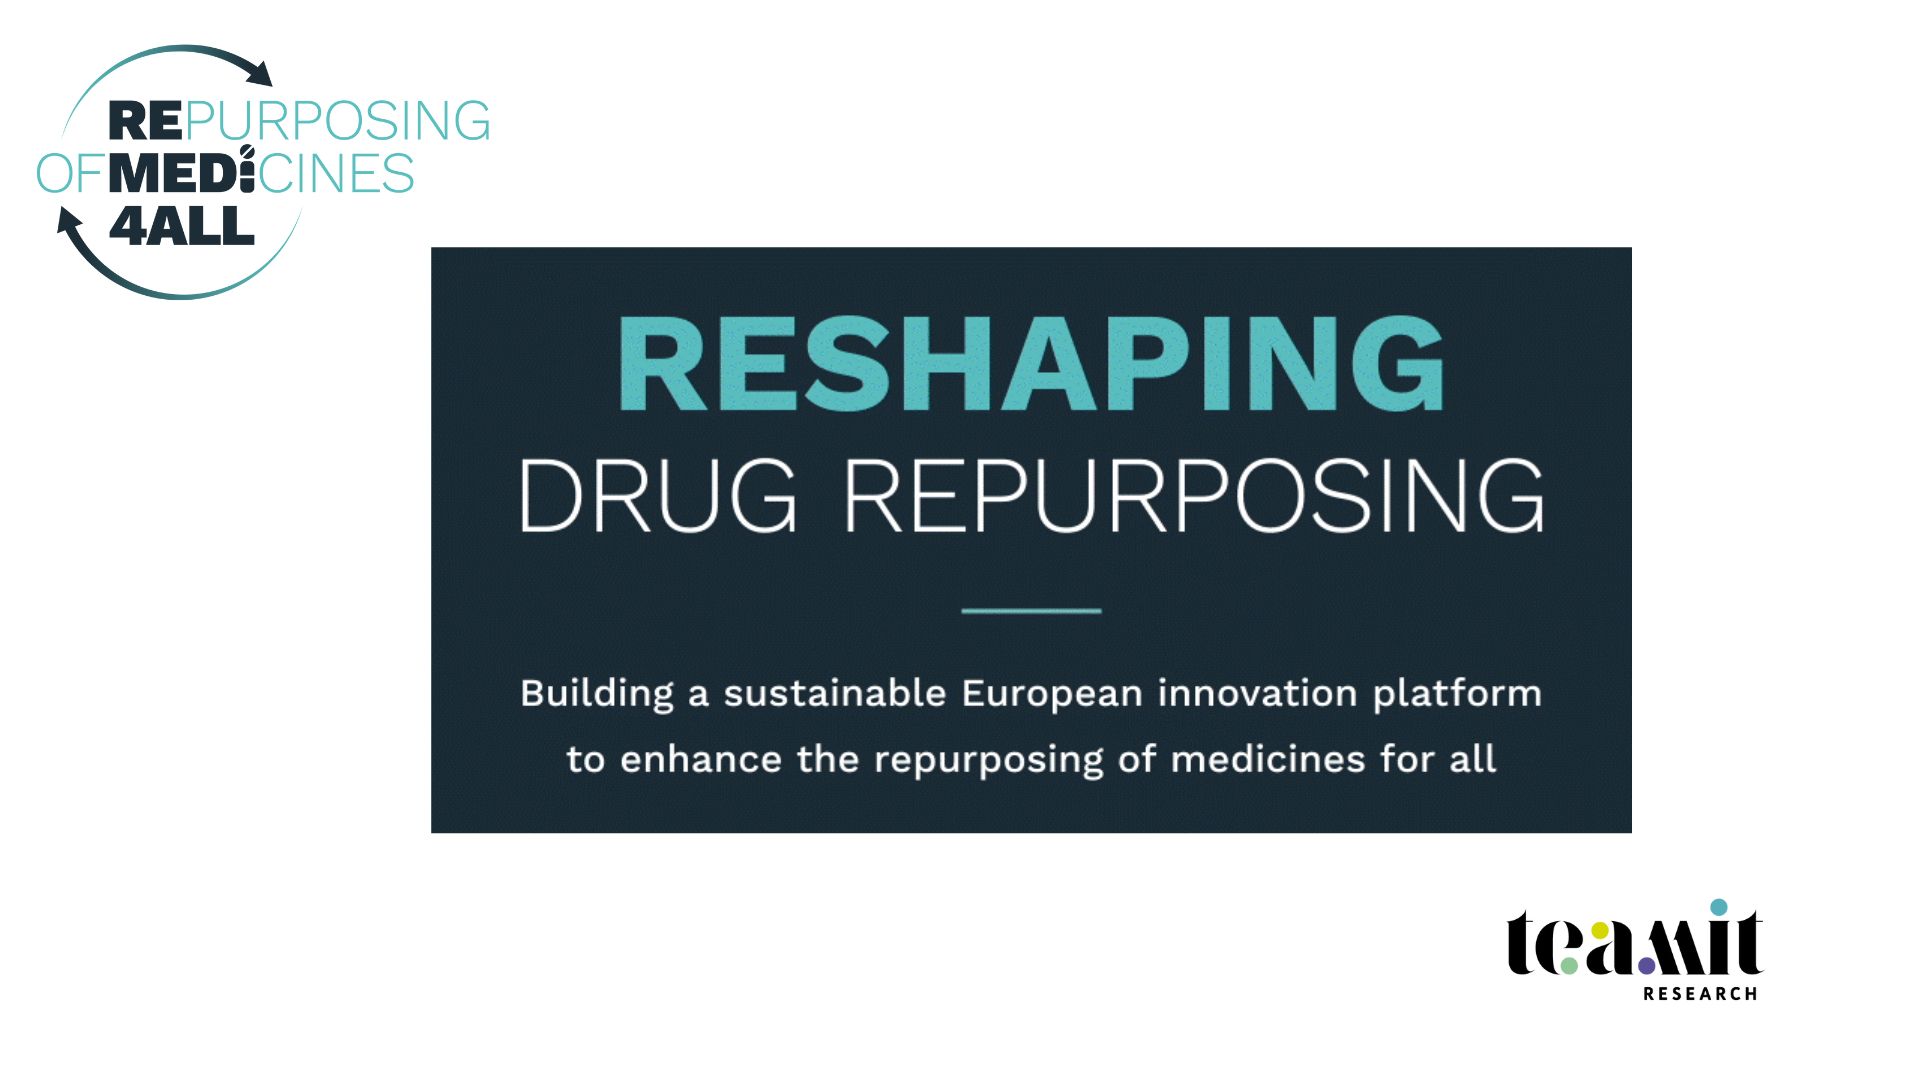 REMEDi4ALL, an EU-funded research project, kicks off to drive forward the repurposing of medicines in Europe